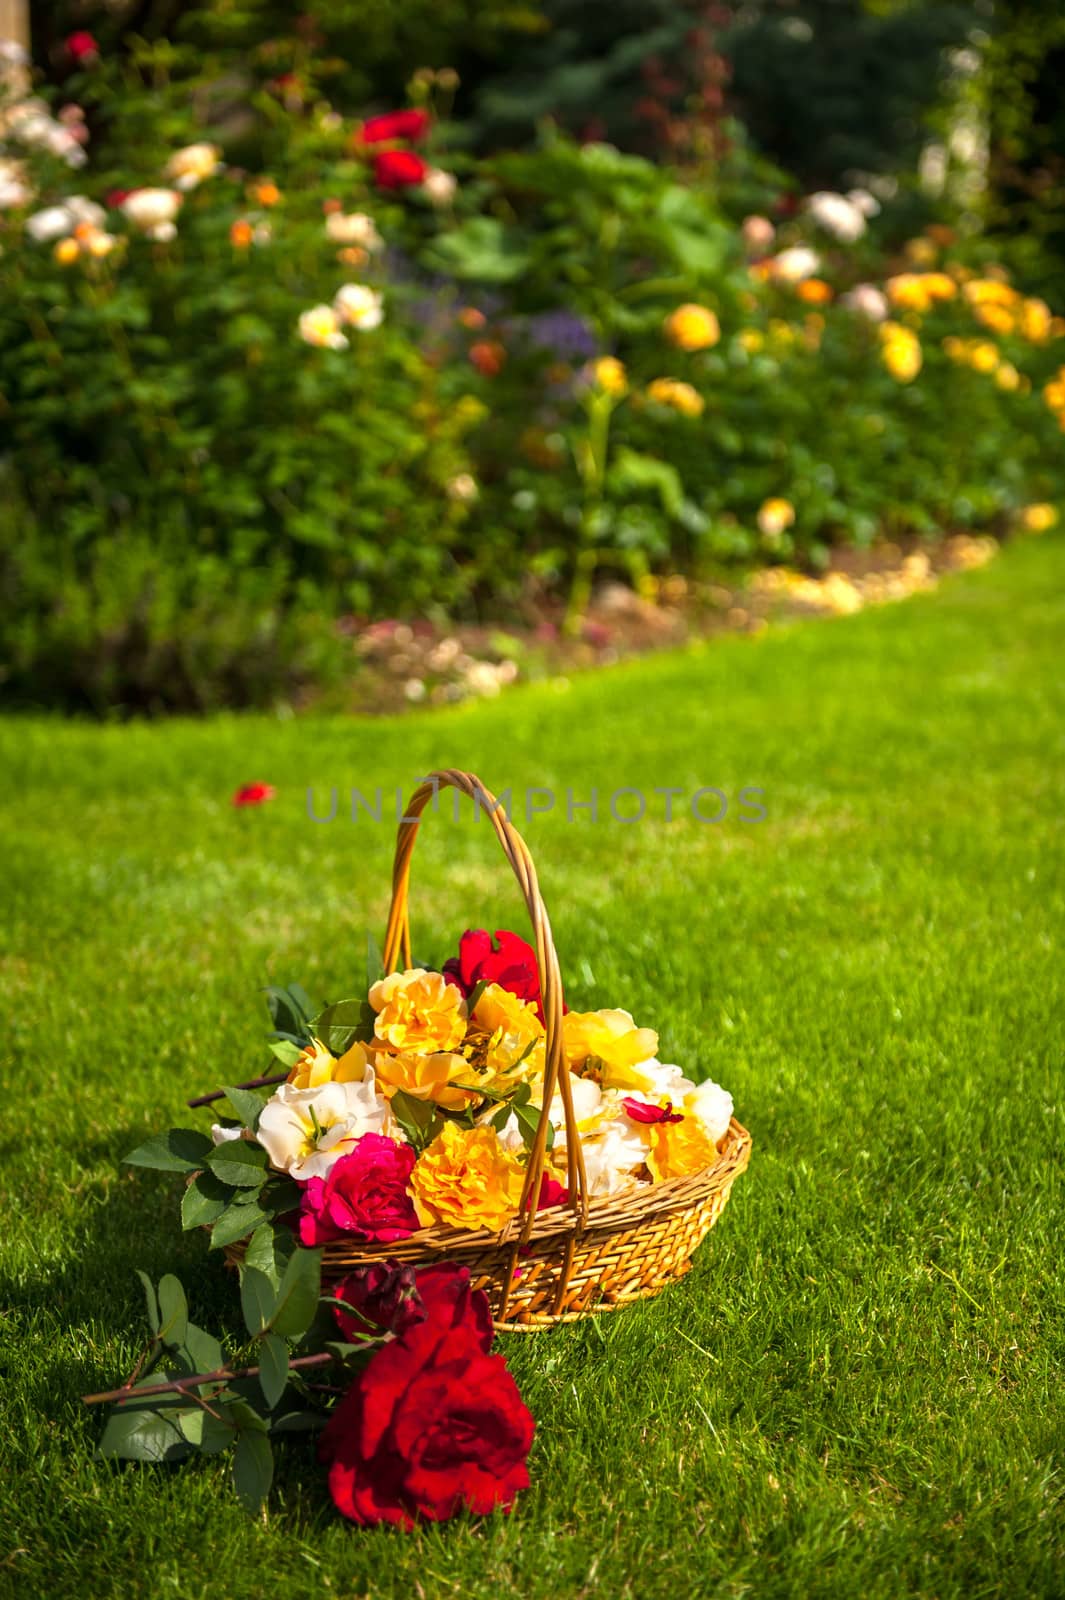 Basket full of various roses bloom laying in the garden